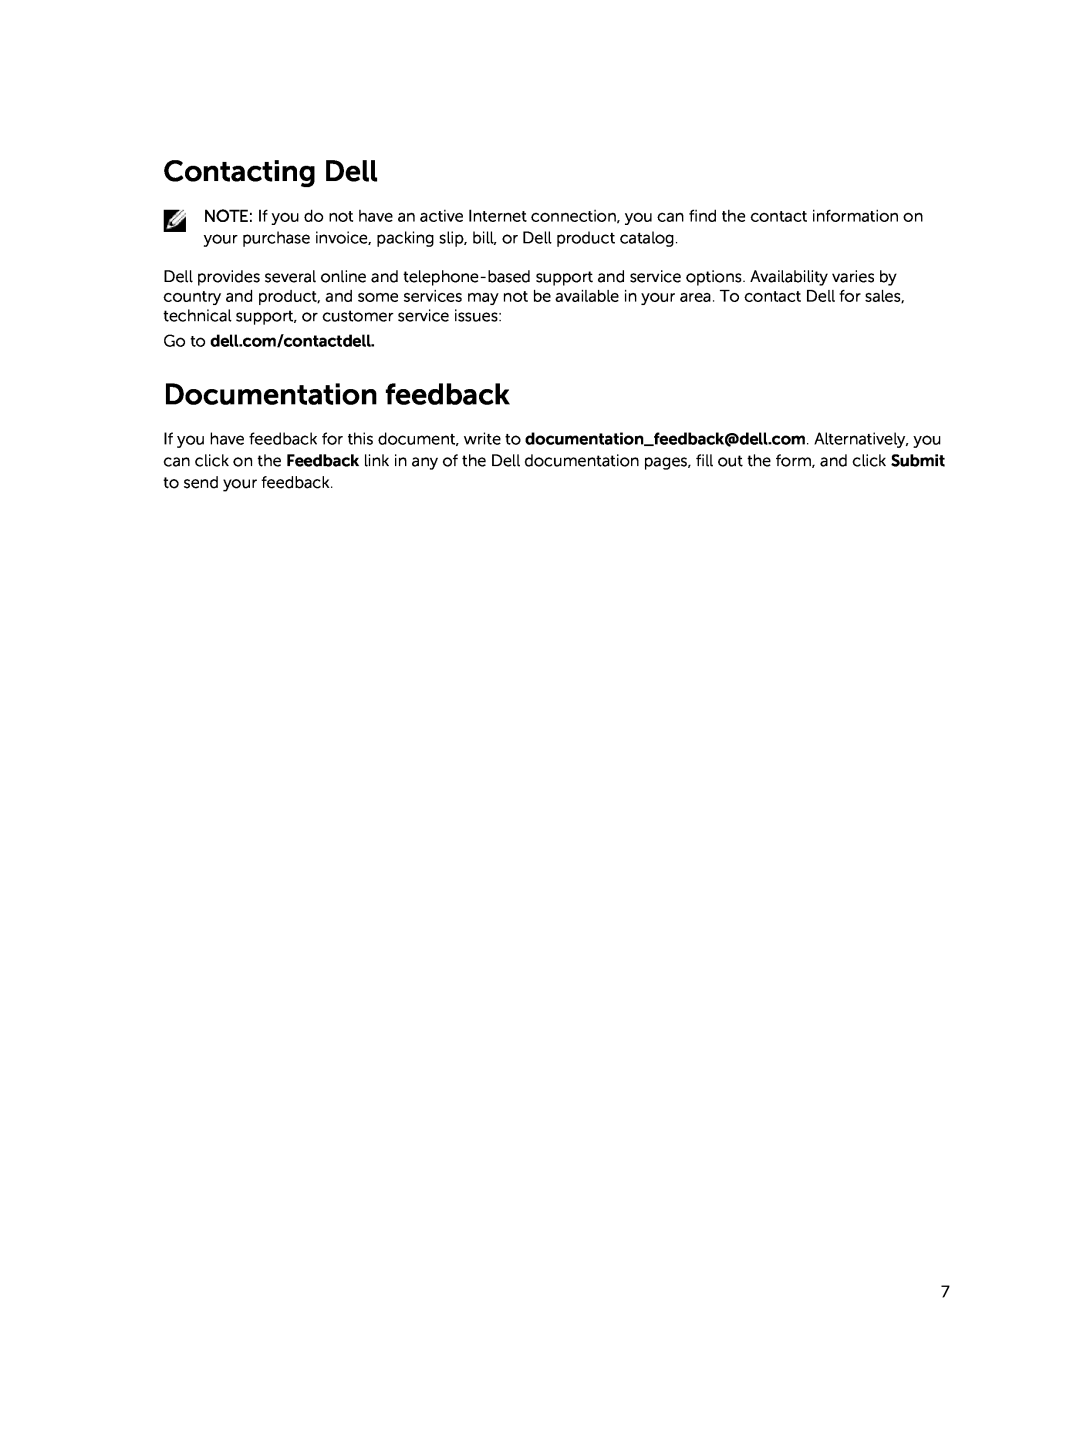 Dell MD3460 manual Contacting Dell, Documentation feedback 